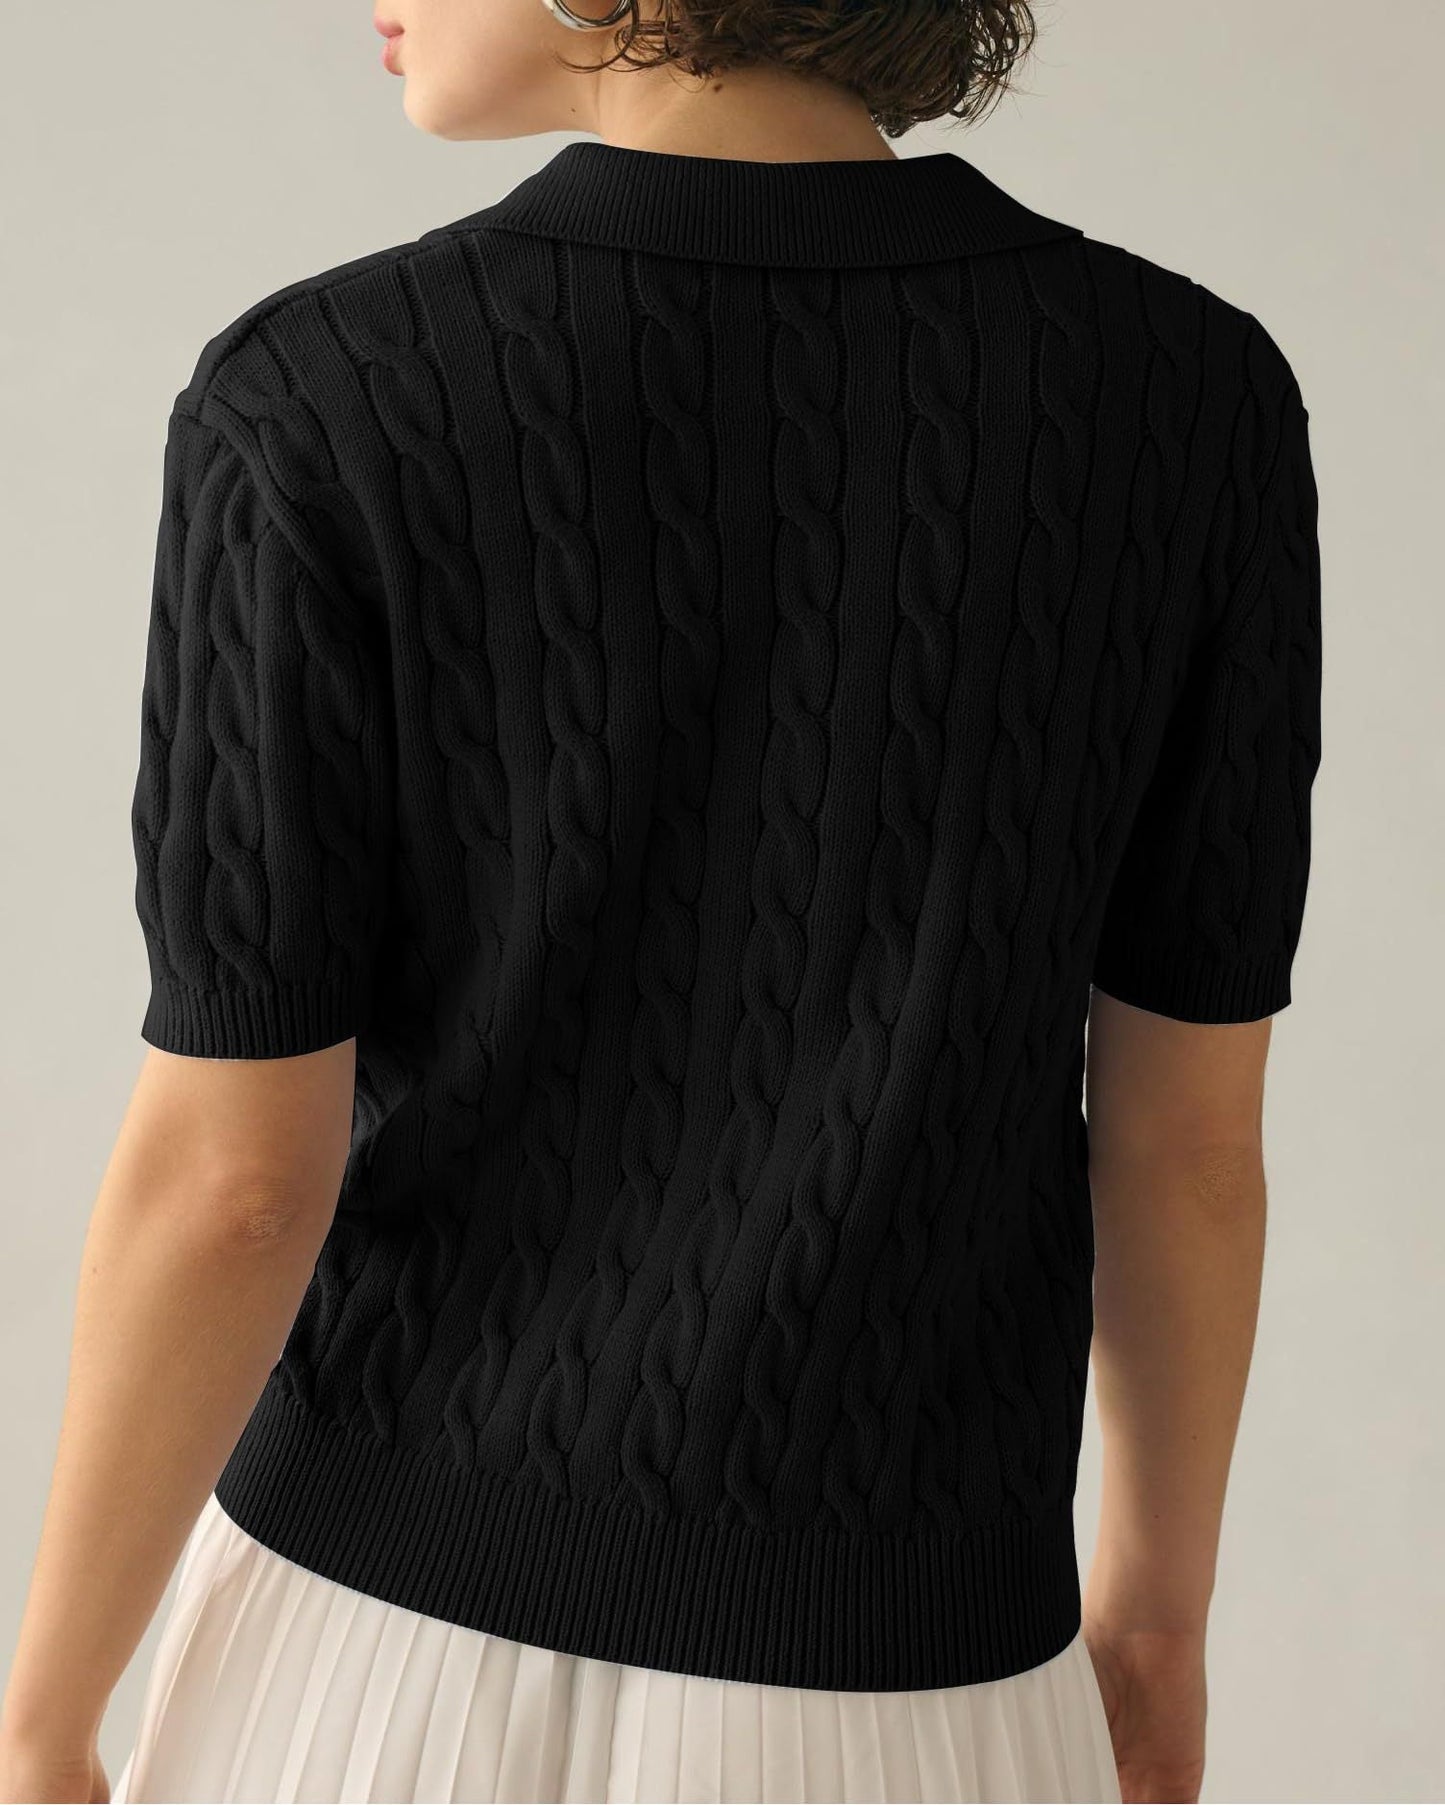 NTG Fad Cable Short Sleeve Solid Lapel V Neck Knit Sweater